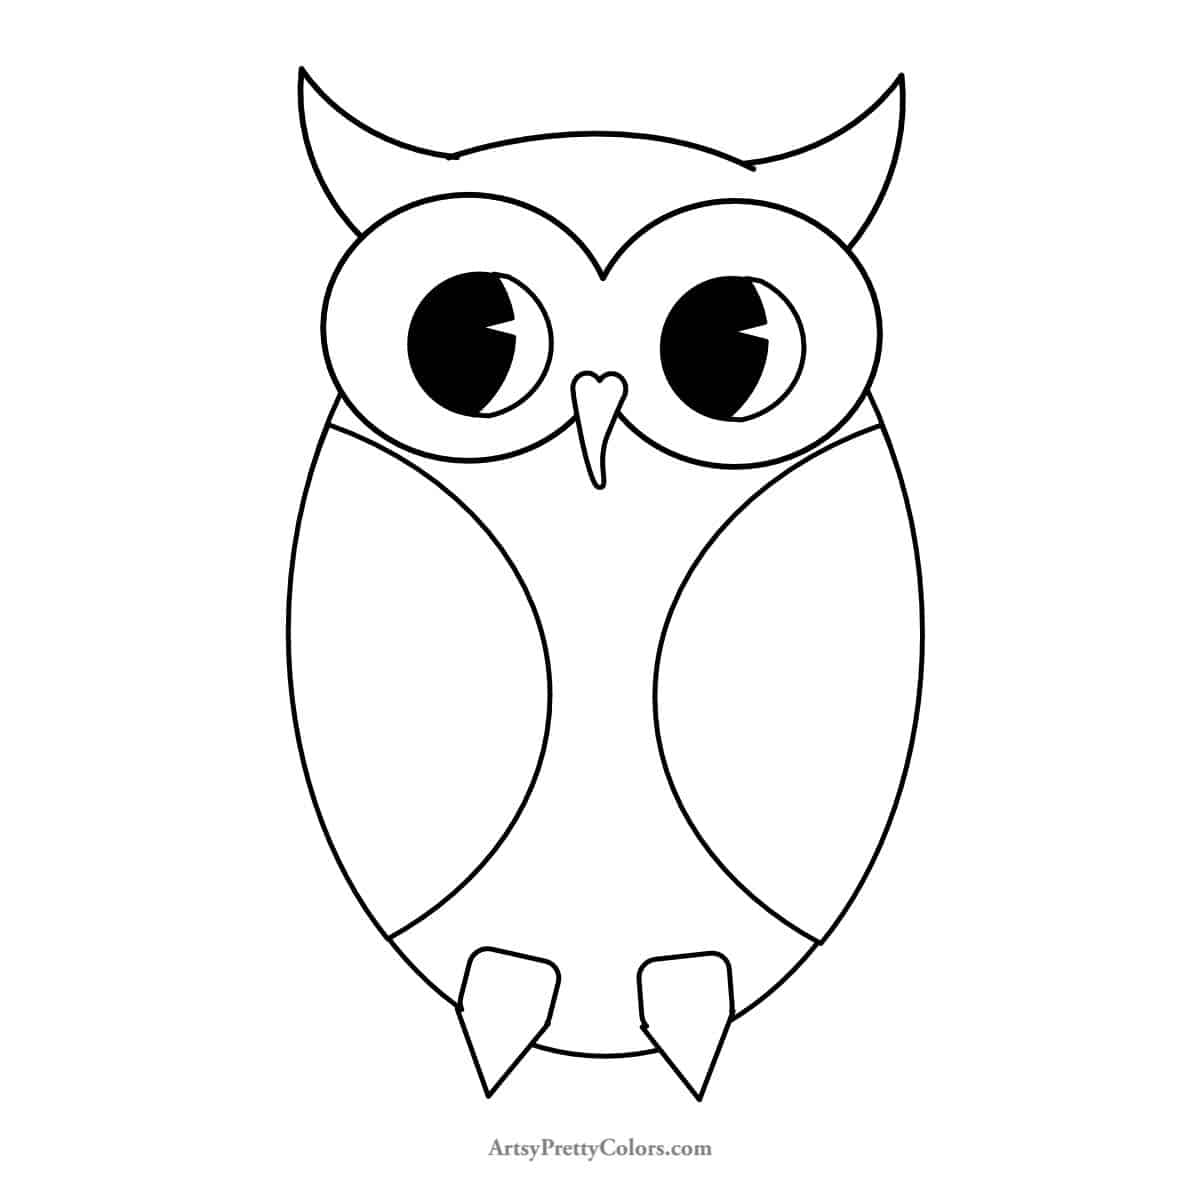 owl's pupils colored in